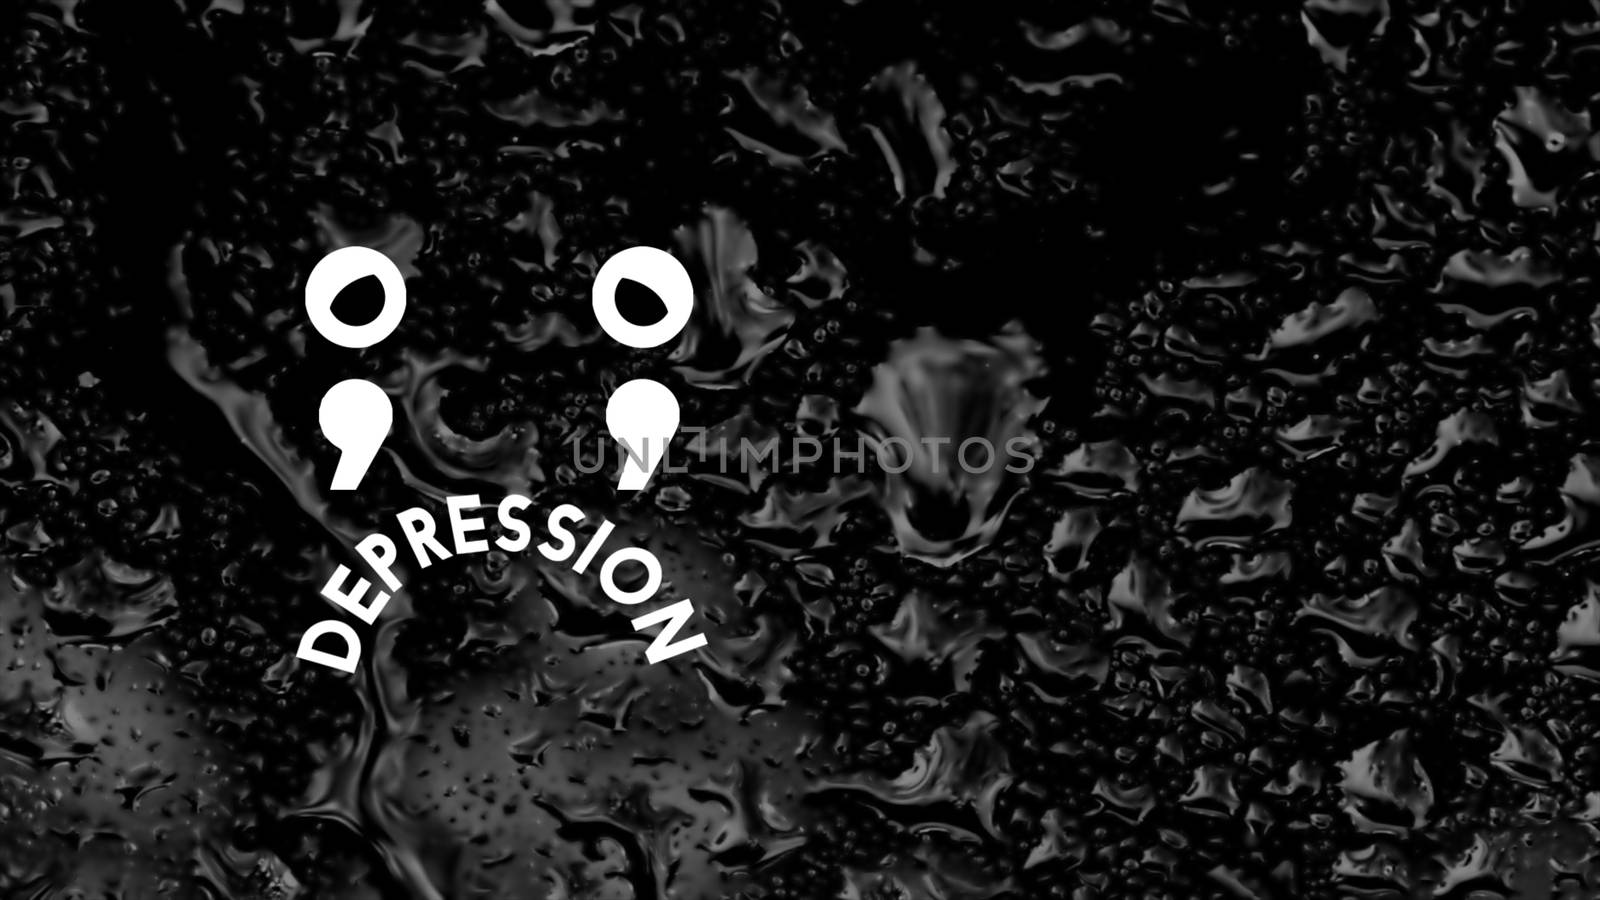 A couple of animated semicolons that looks like a sad face with rain on the background. Depression concept.